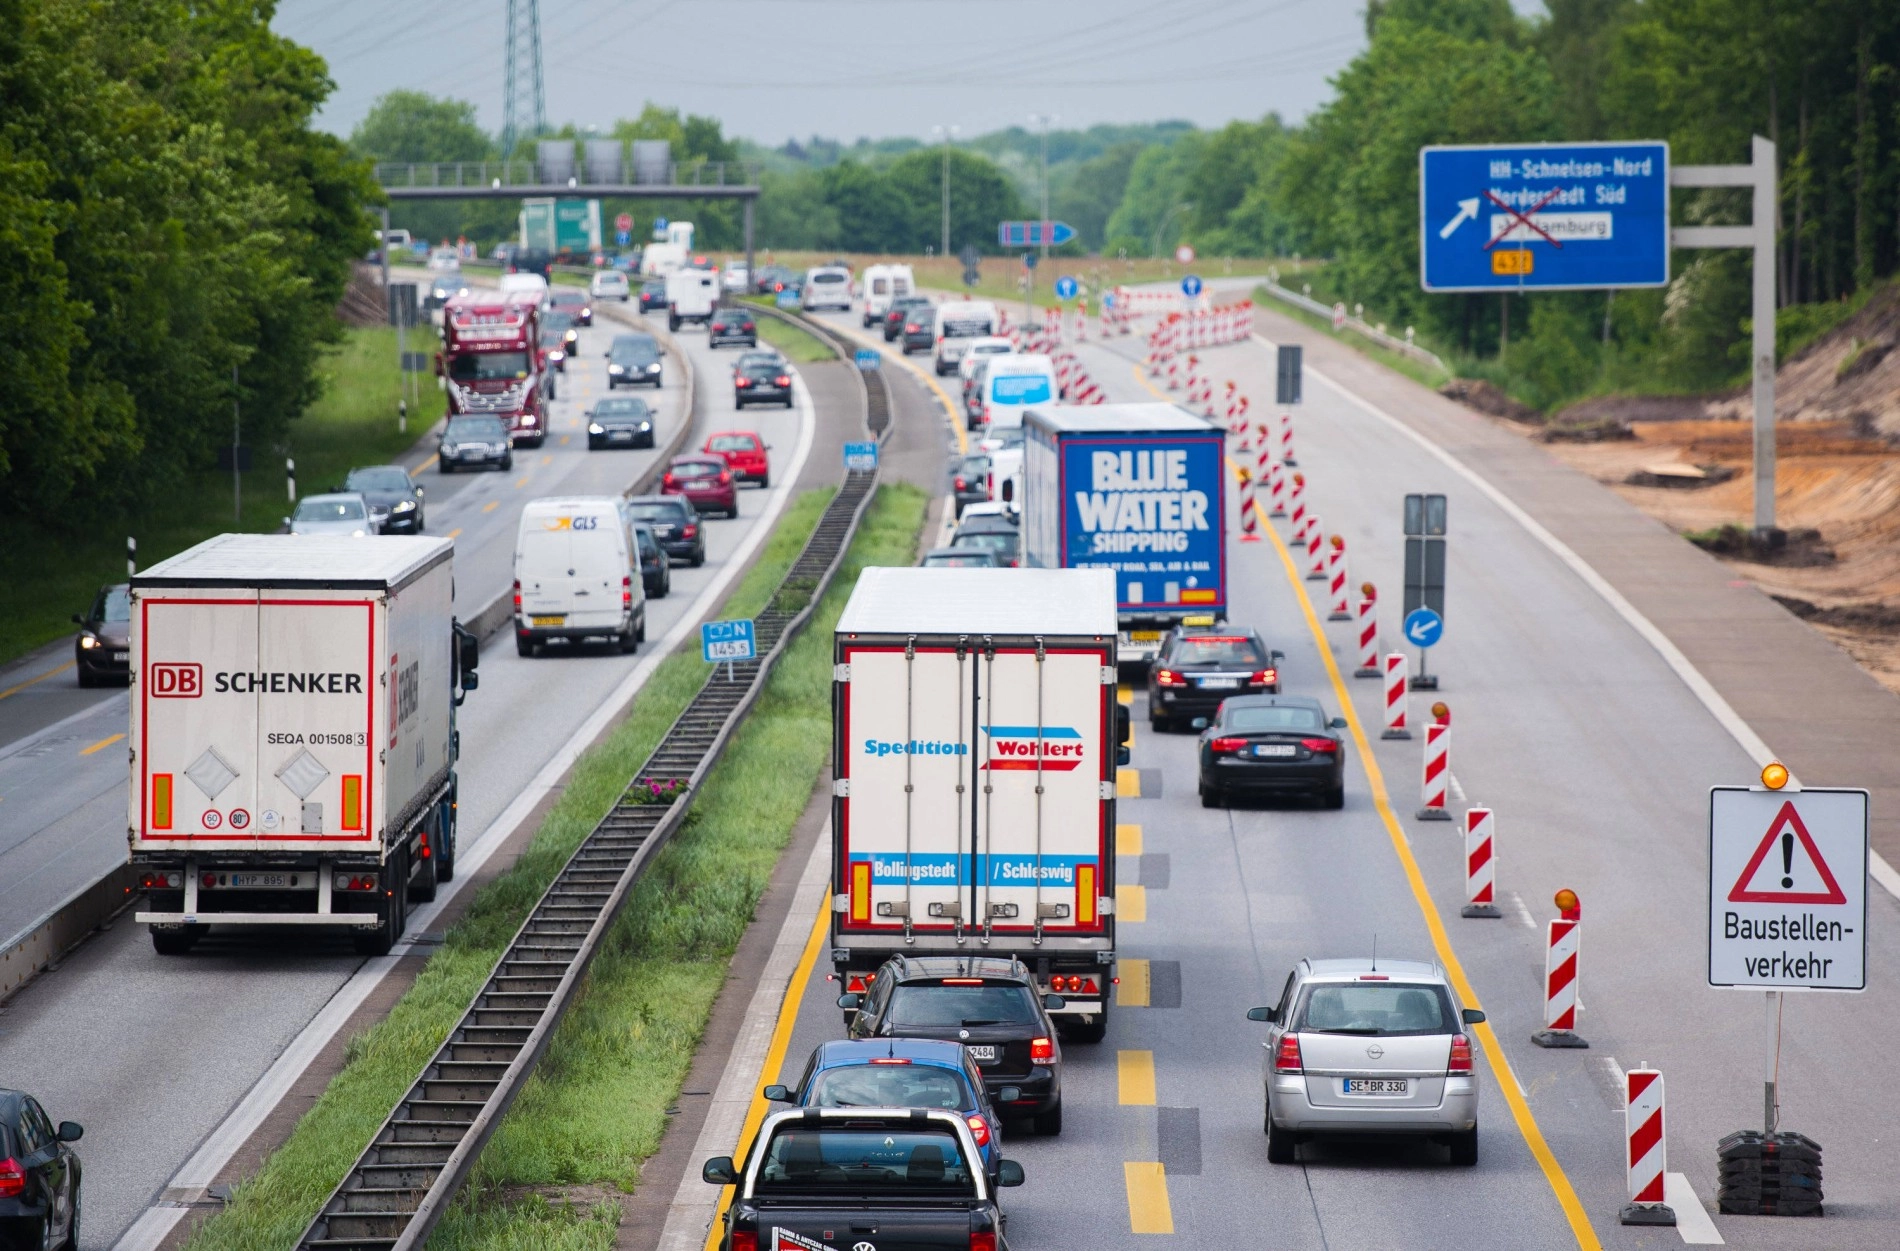 The challenges and controversies surrounding the expansion and maintenance of the autobahn network in modern times